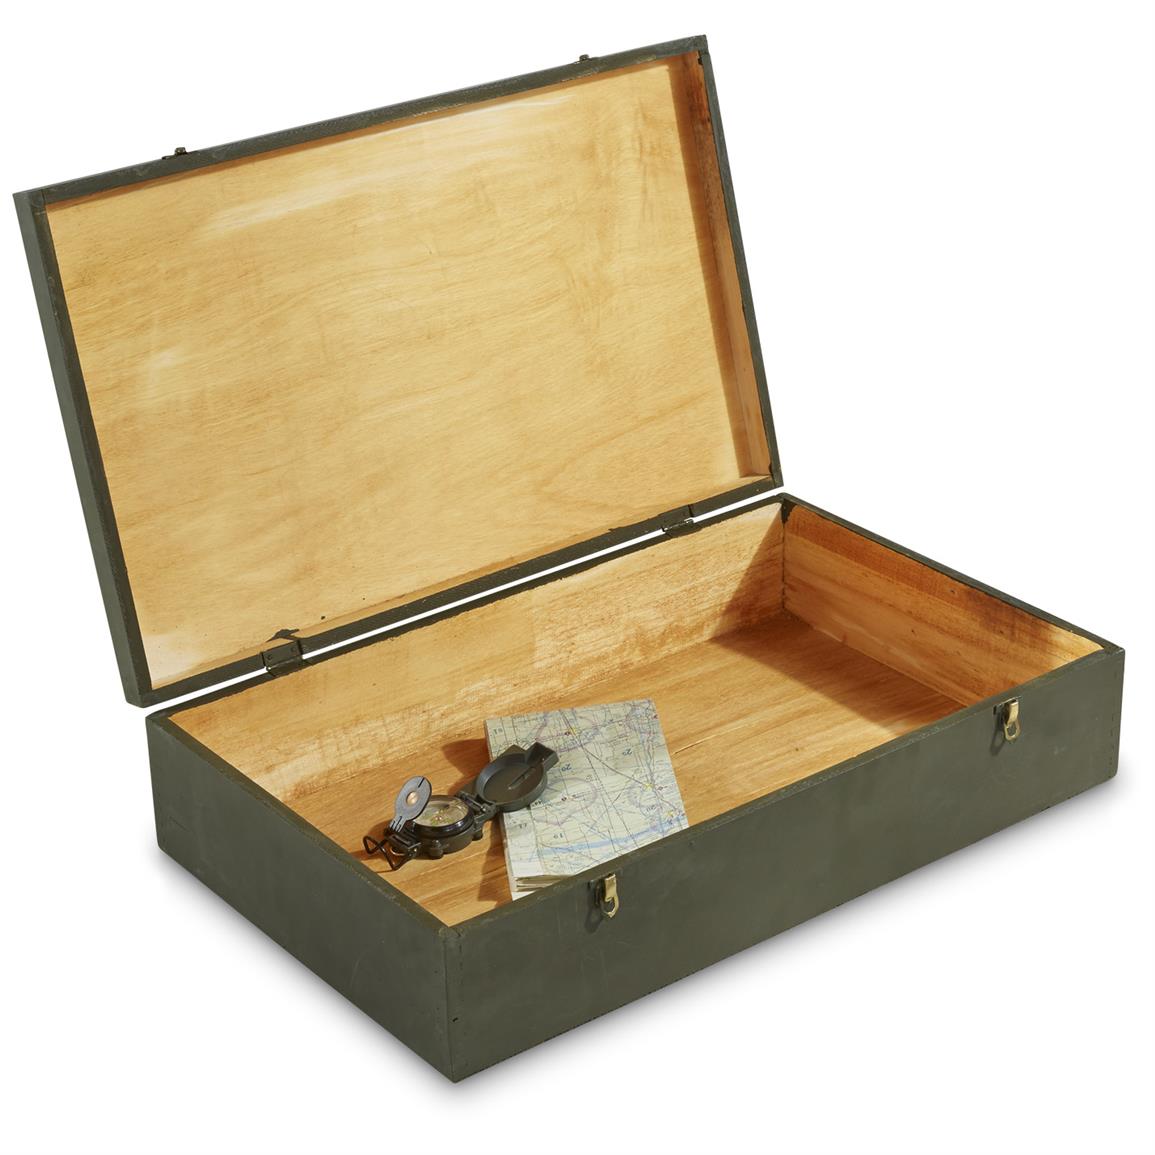 New Italian Military Issue Wooden Storage Box - 658128, Storage Containers At Sportsman'S Guide